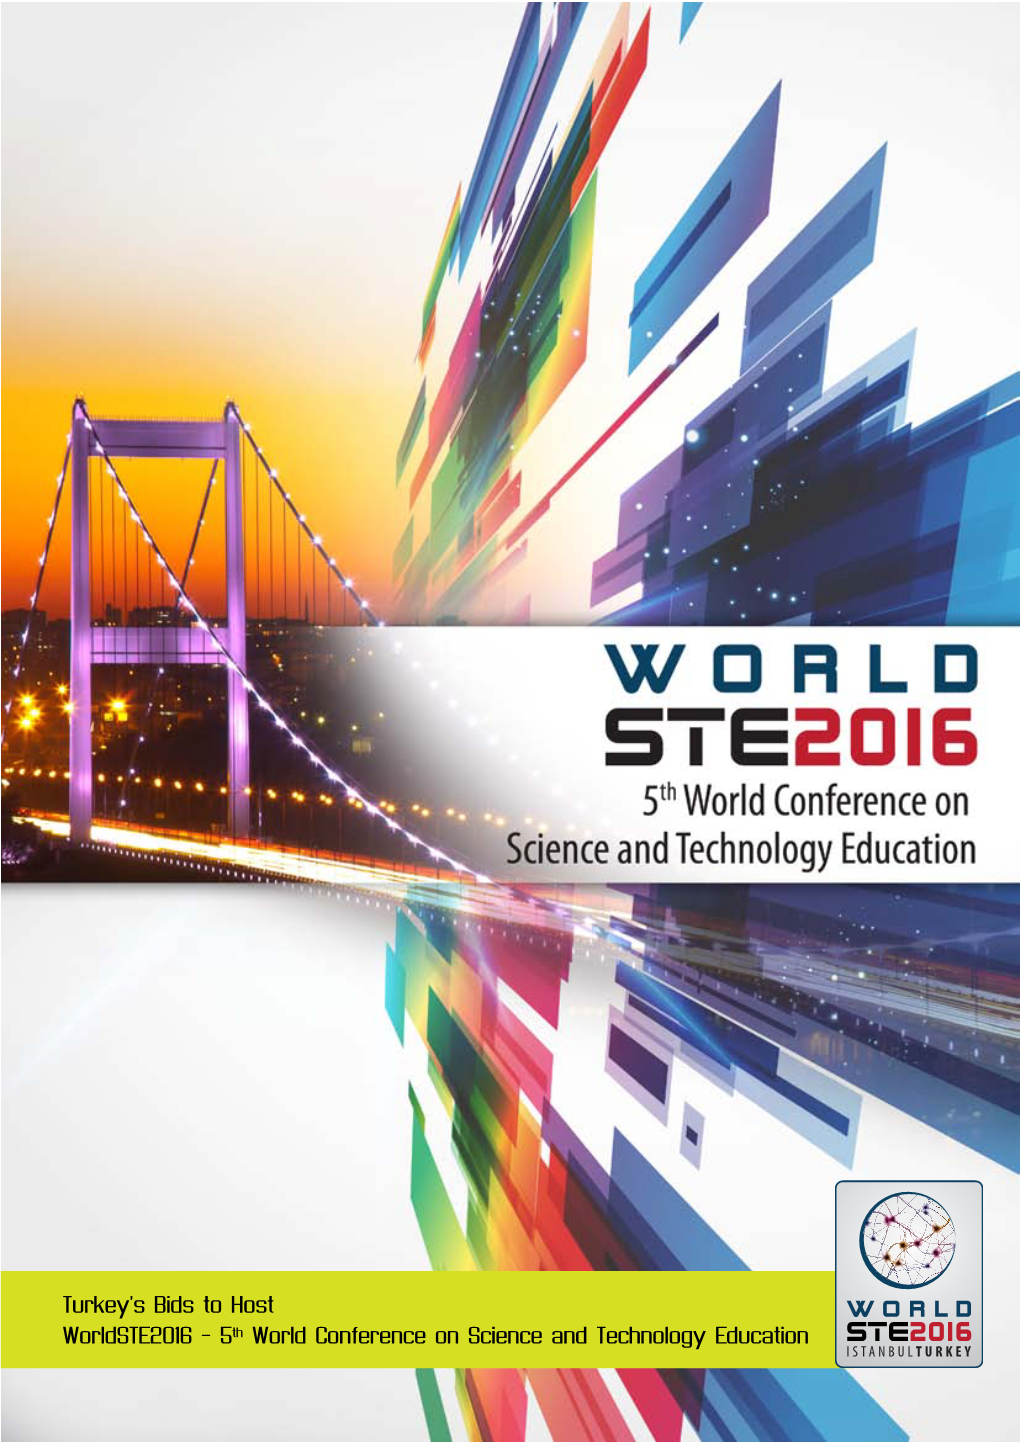 5Th World Conference on Science and Technology Education